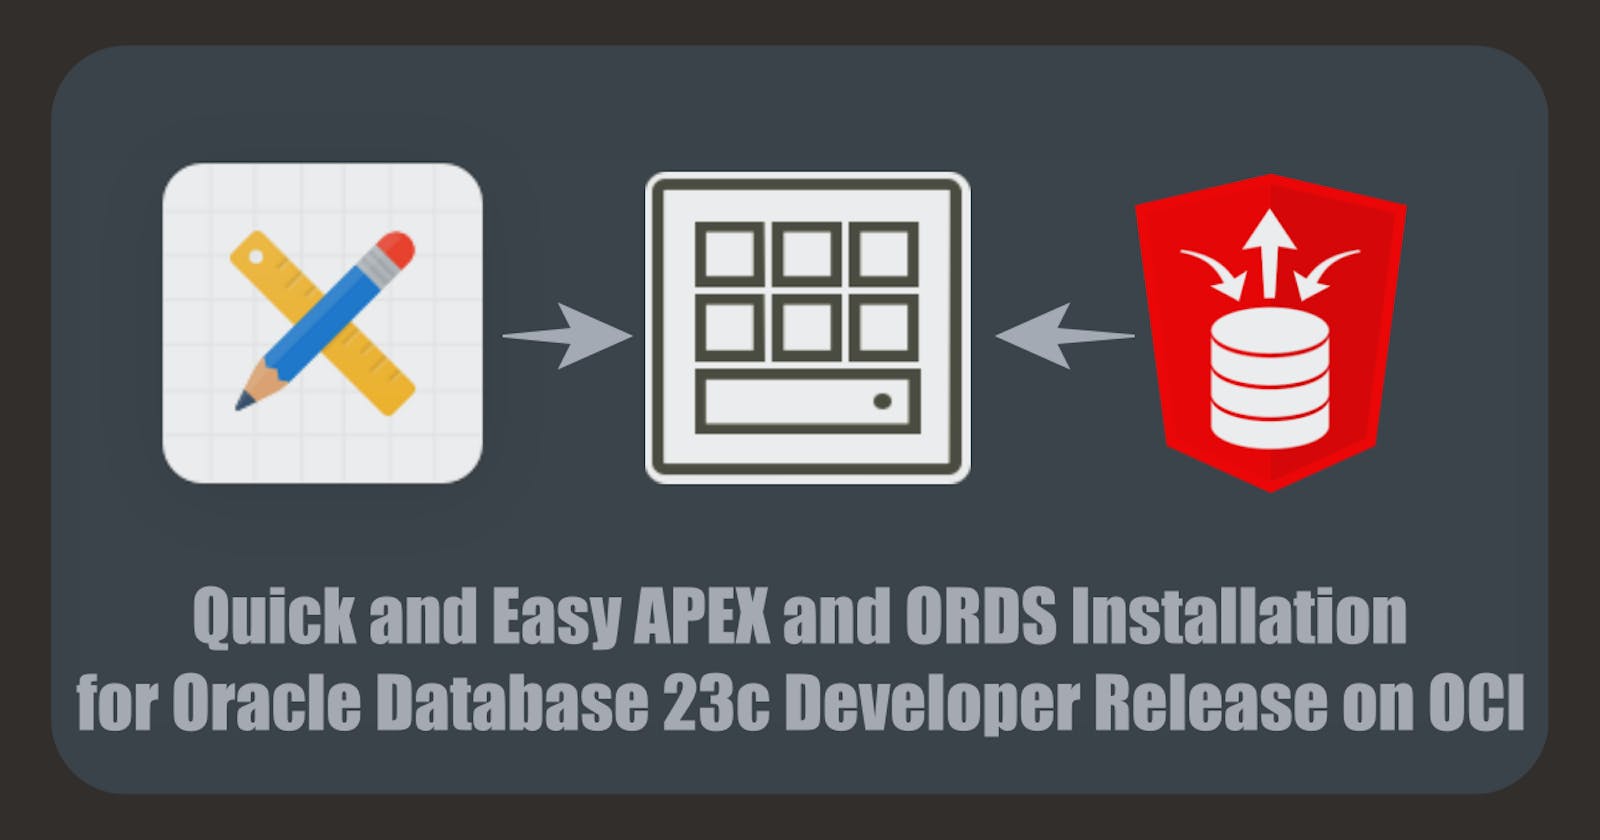 Quick and Easy APEX and ORDS Installation for Oracle Database 23c Developer Release on OCI